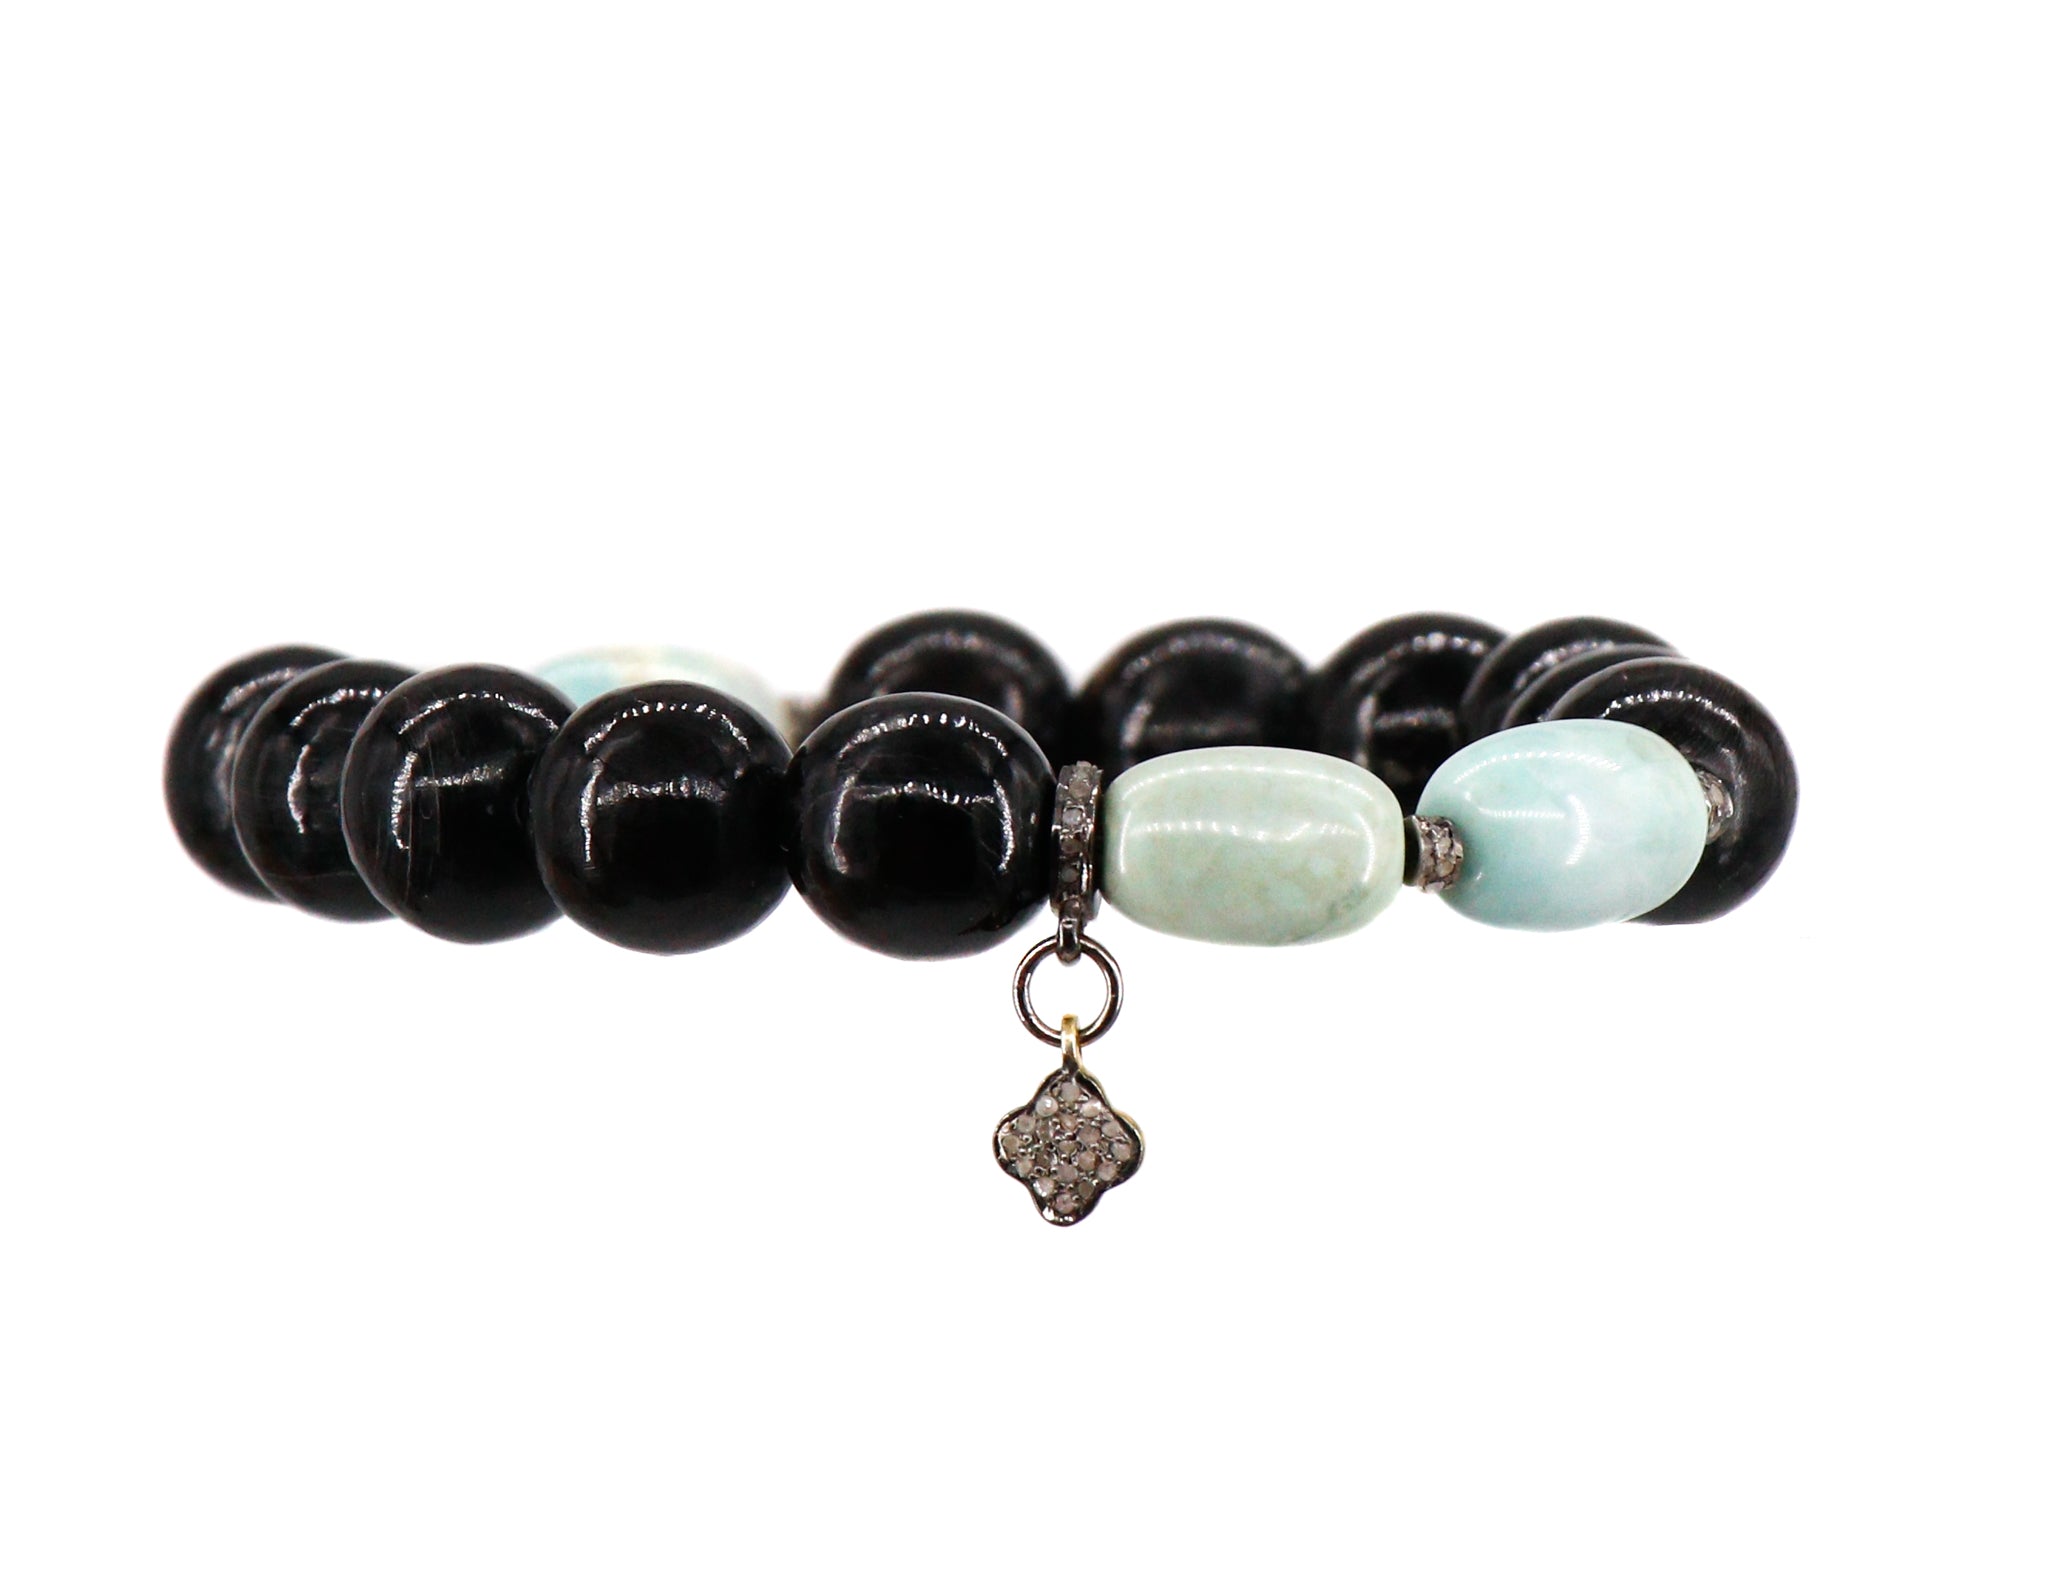 Buffalo horn and Peruvian turquoise bracelet